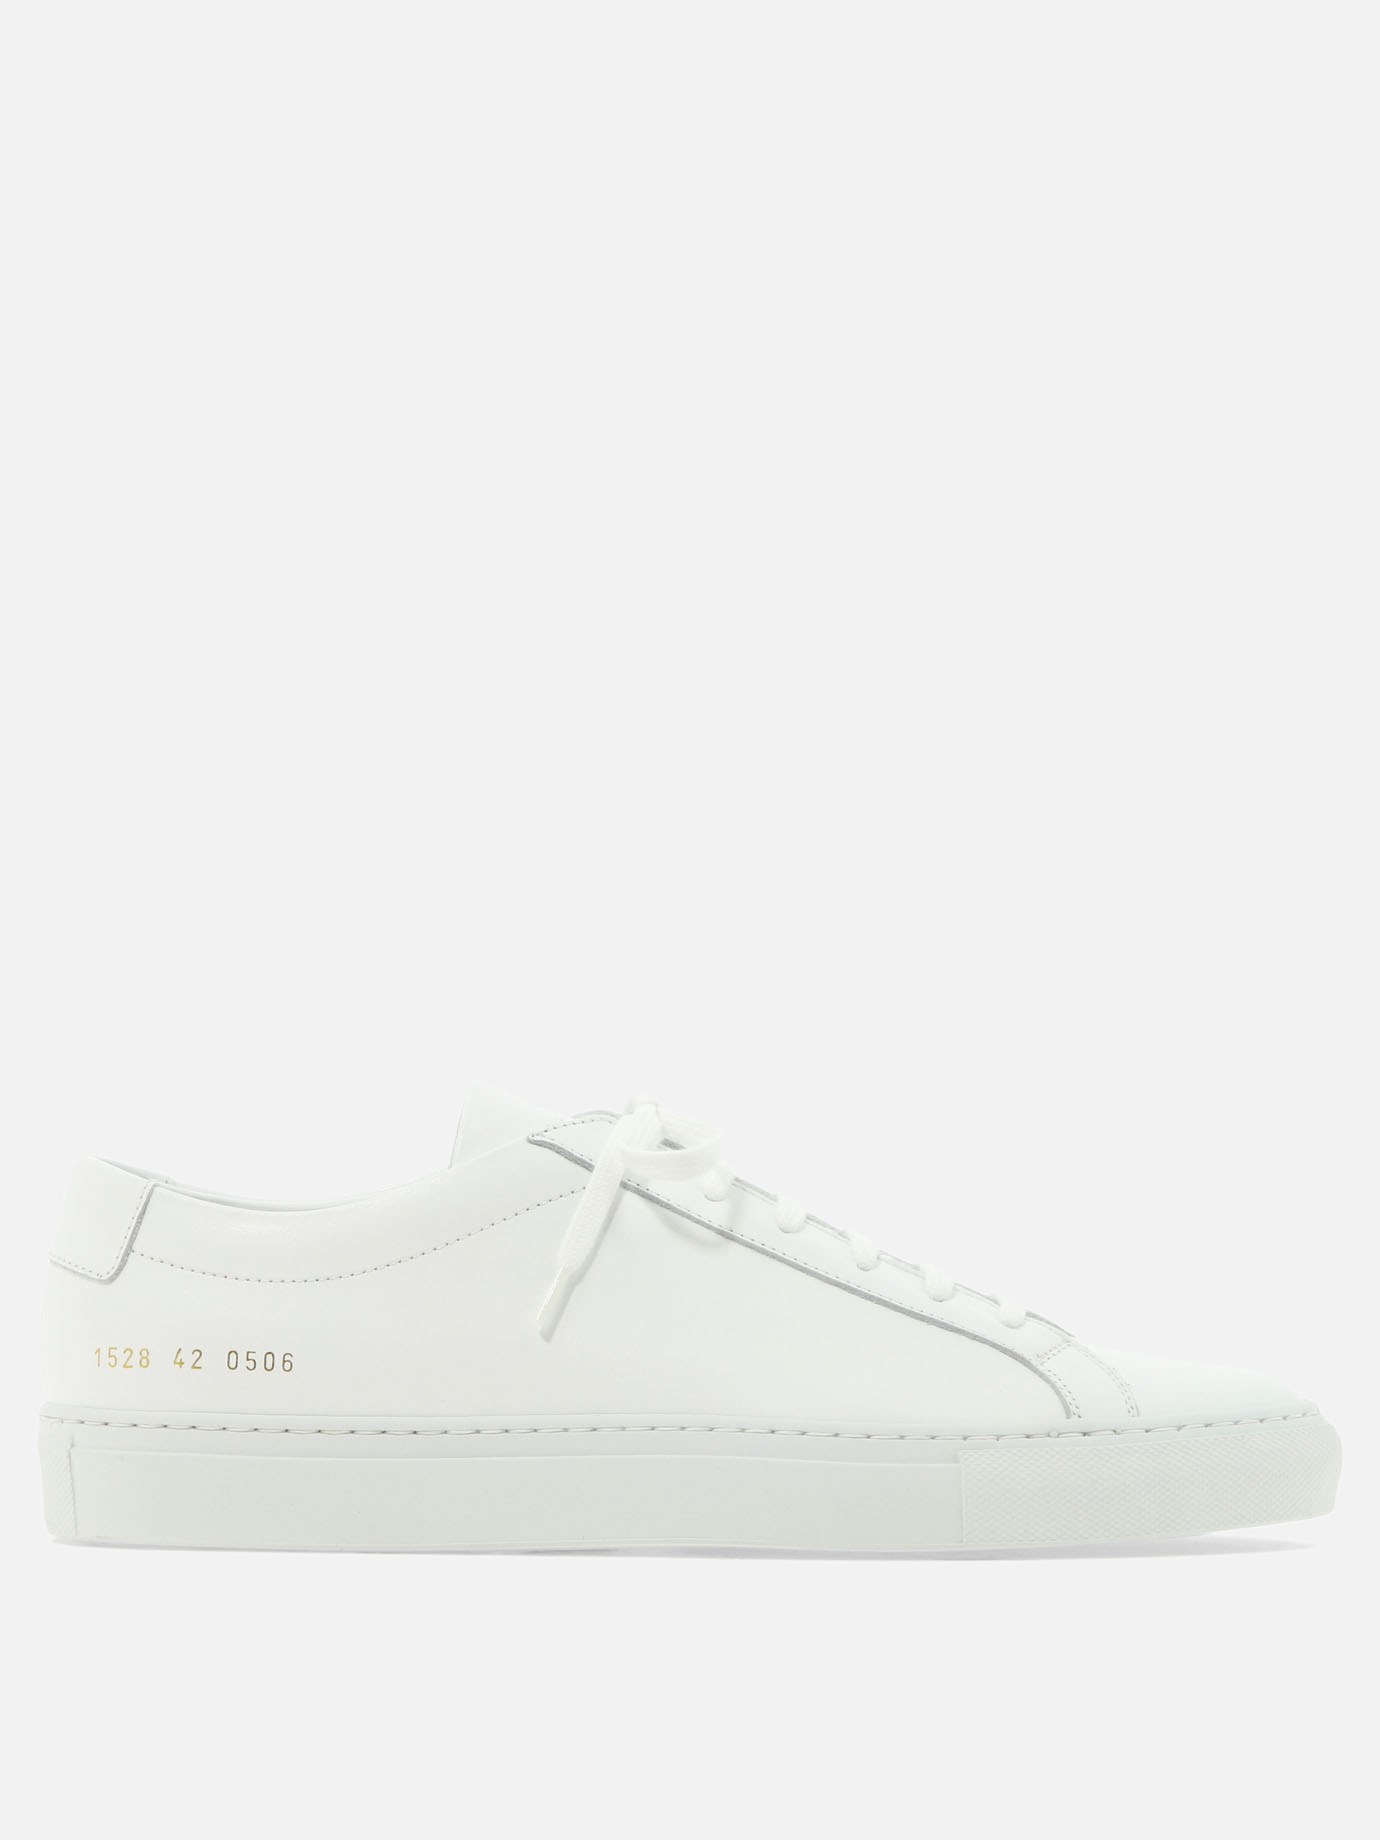 Sneaker  Original Achilles by Common Projects - 4